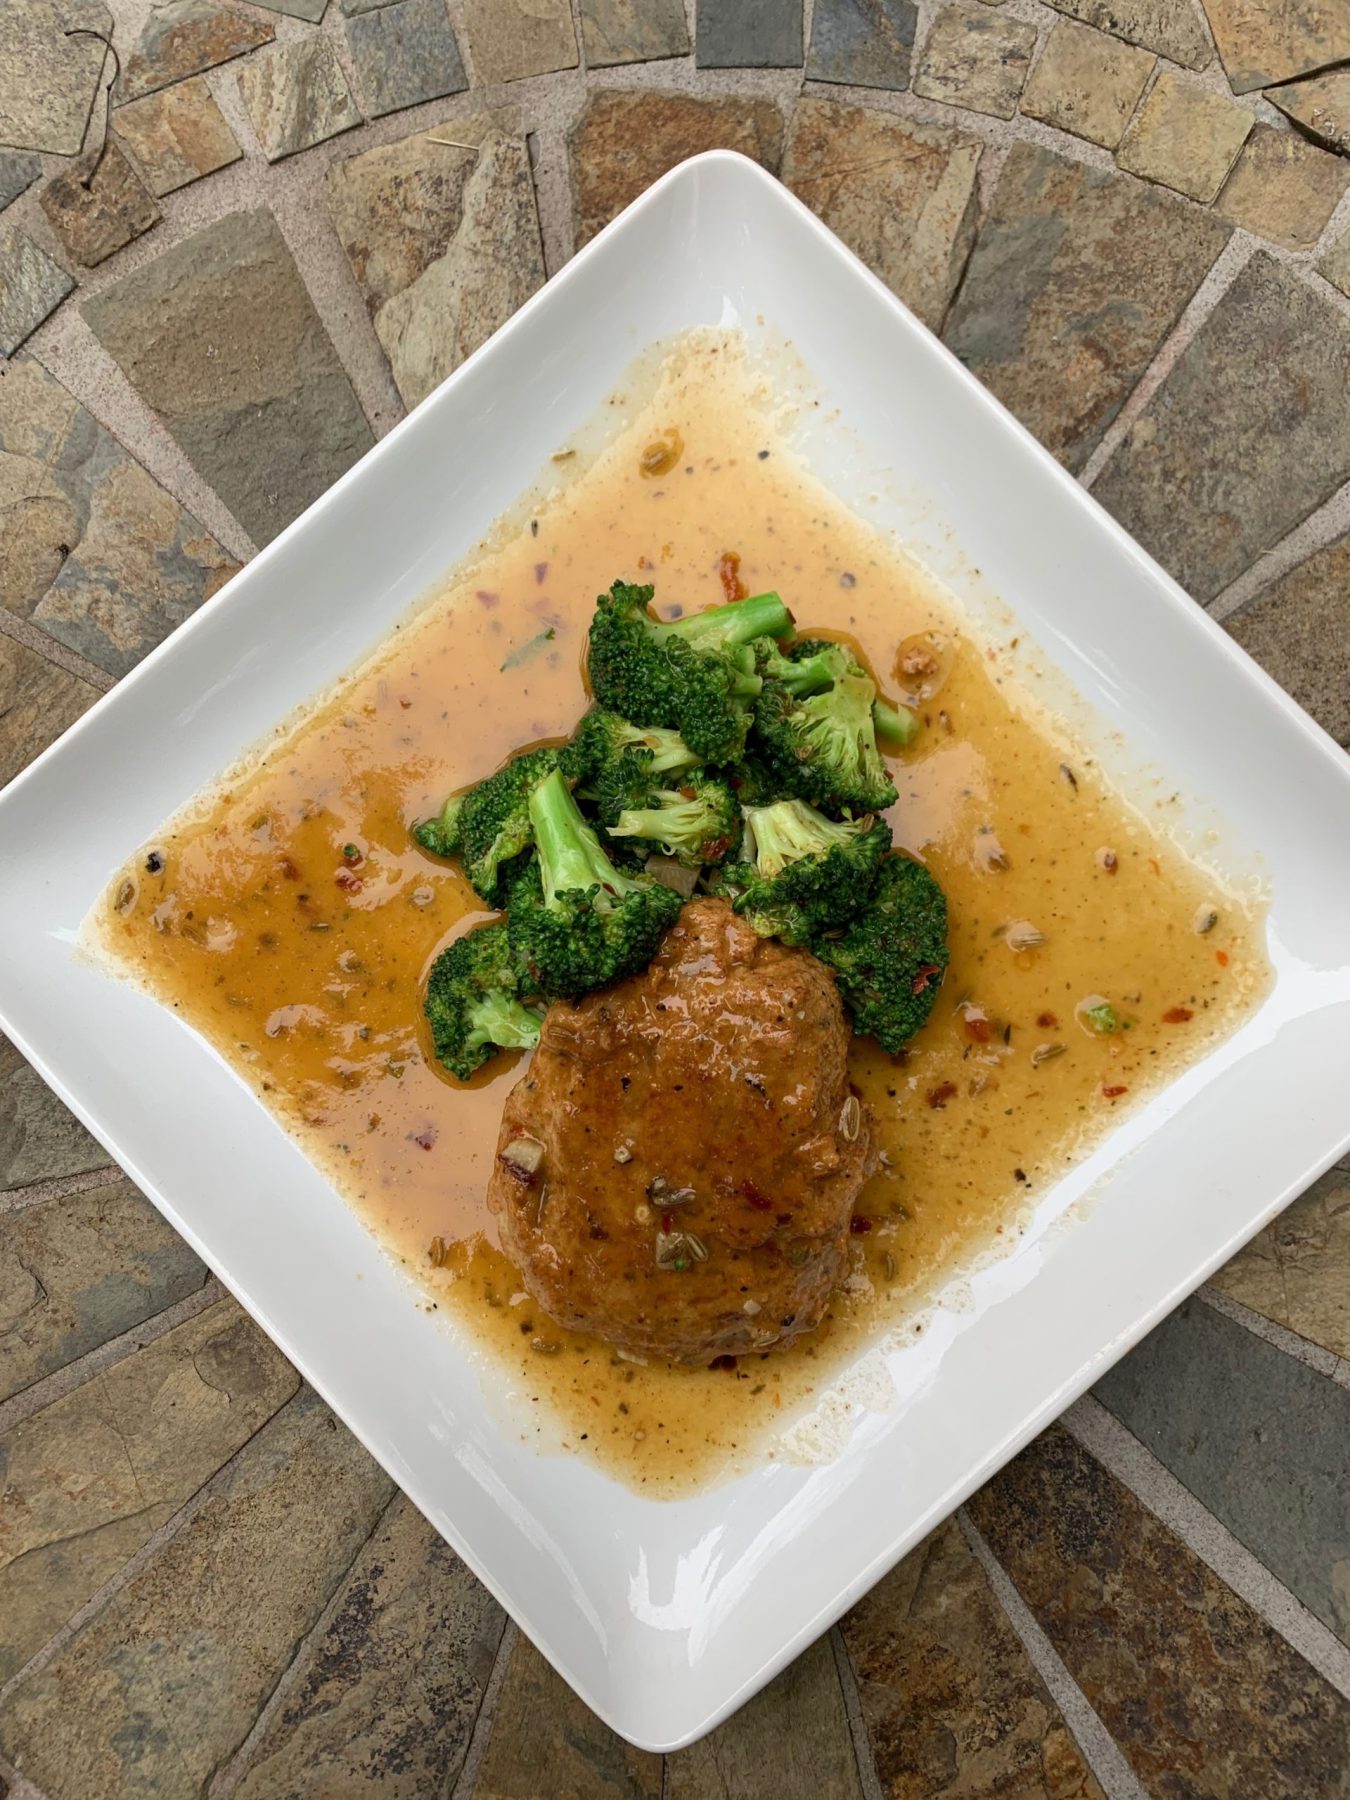 Spicy Chicken or Turkey over Broccoli with Creamy Fennel Seed Sauce